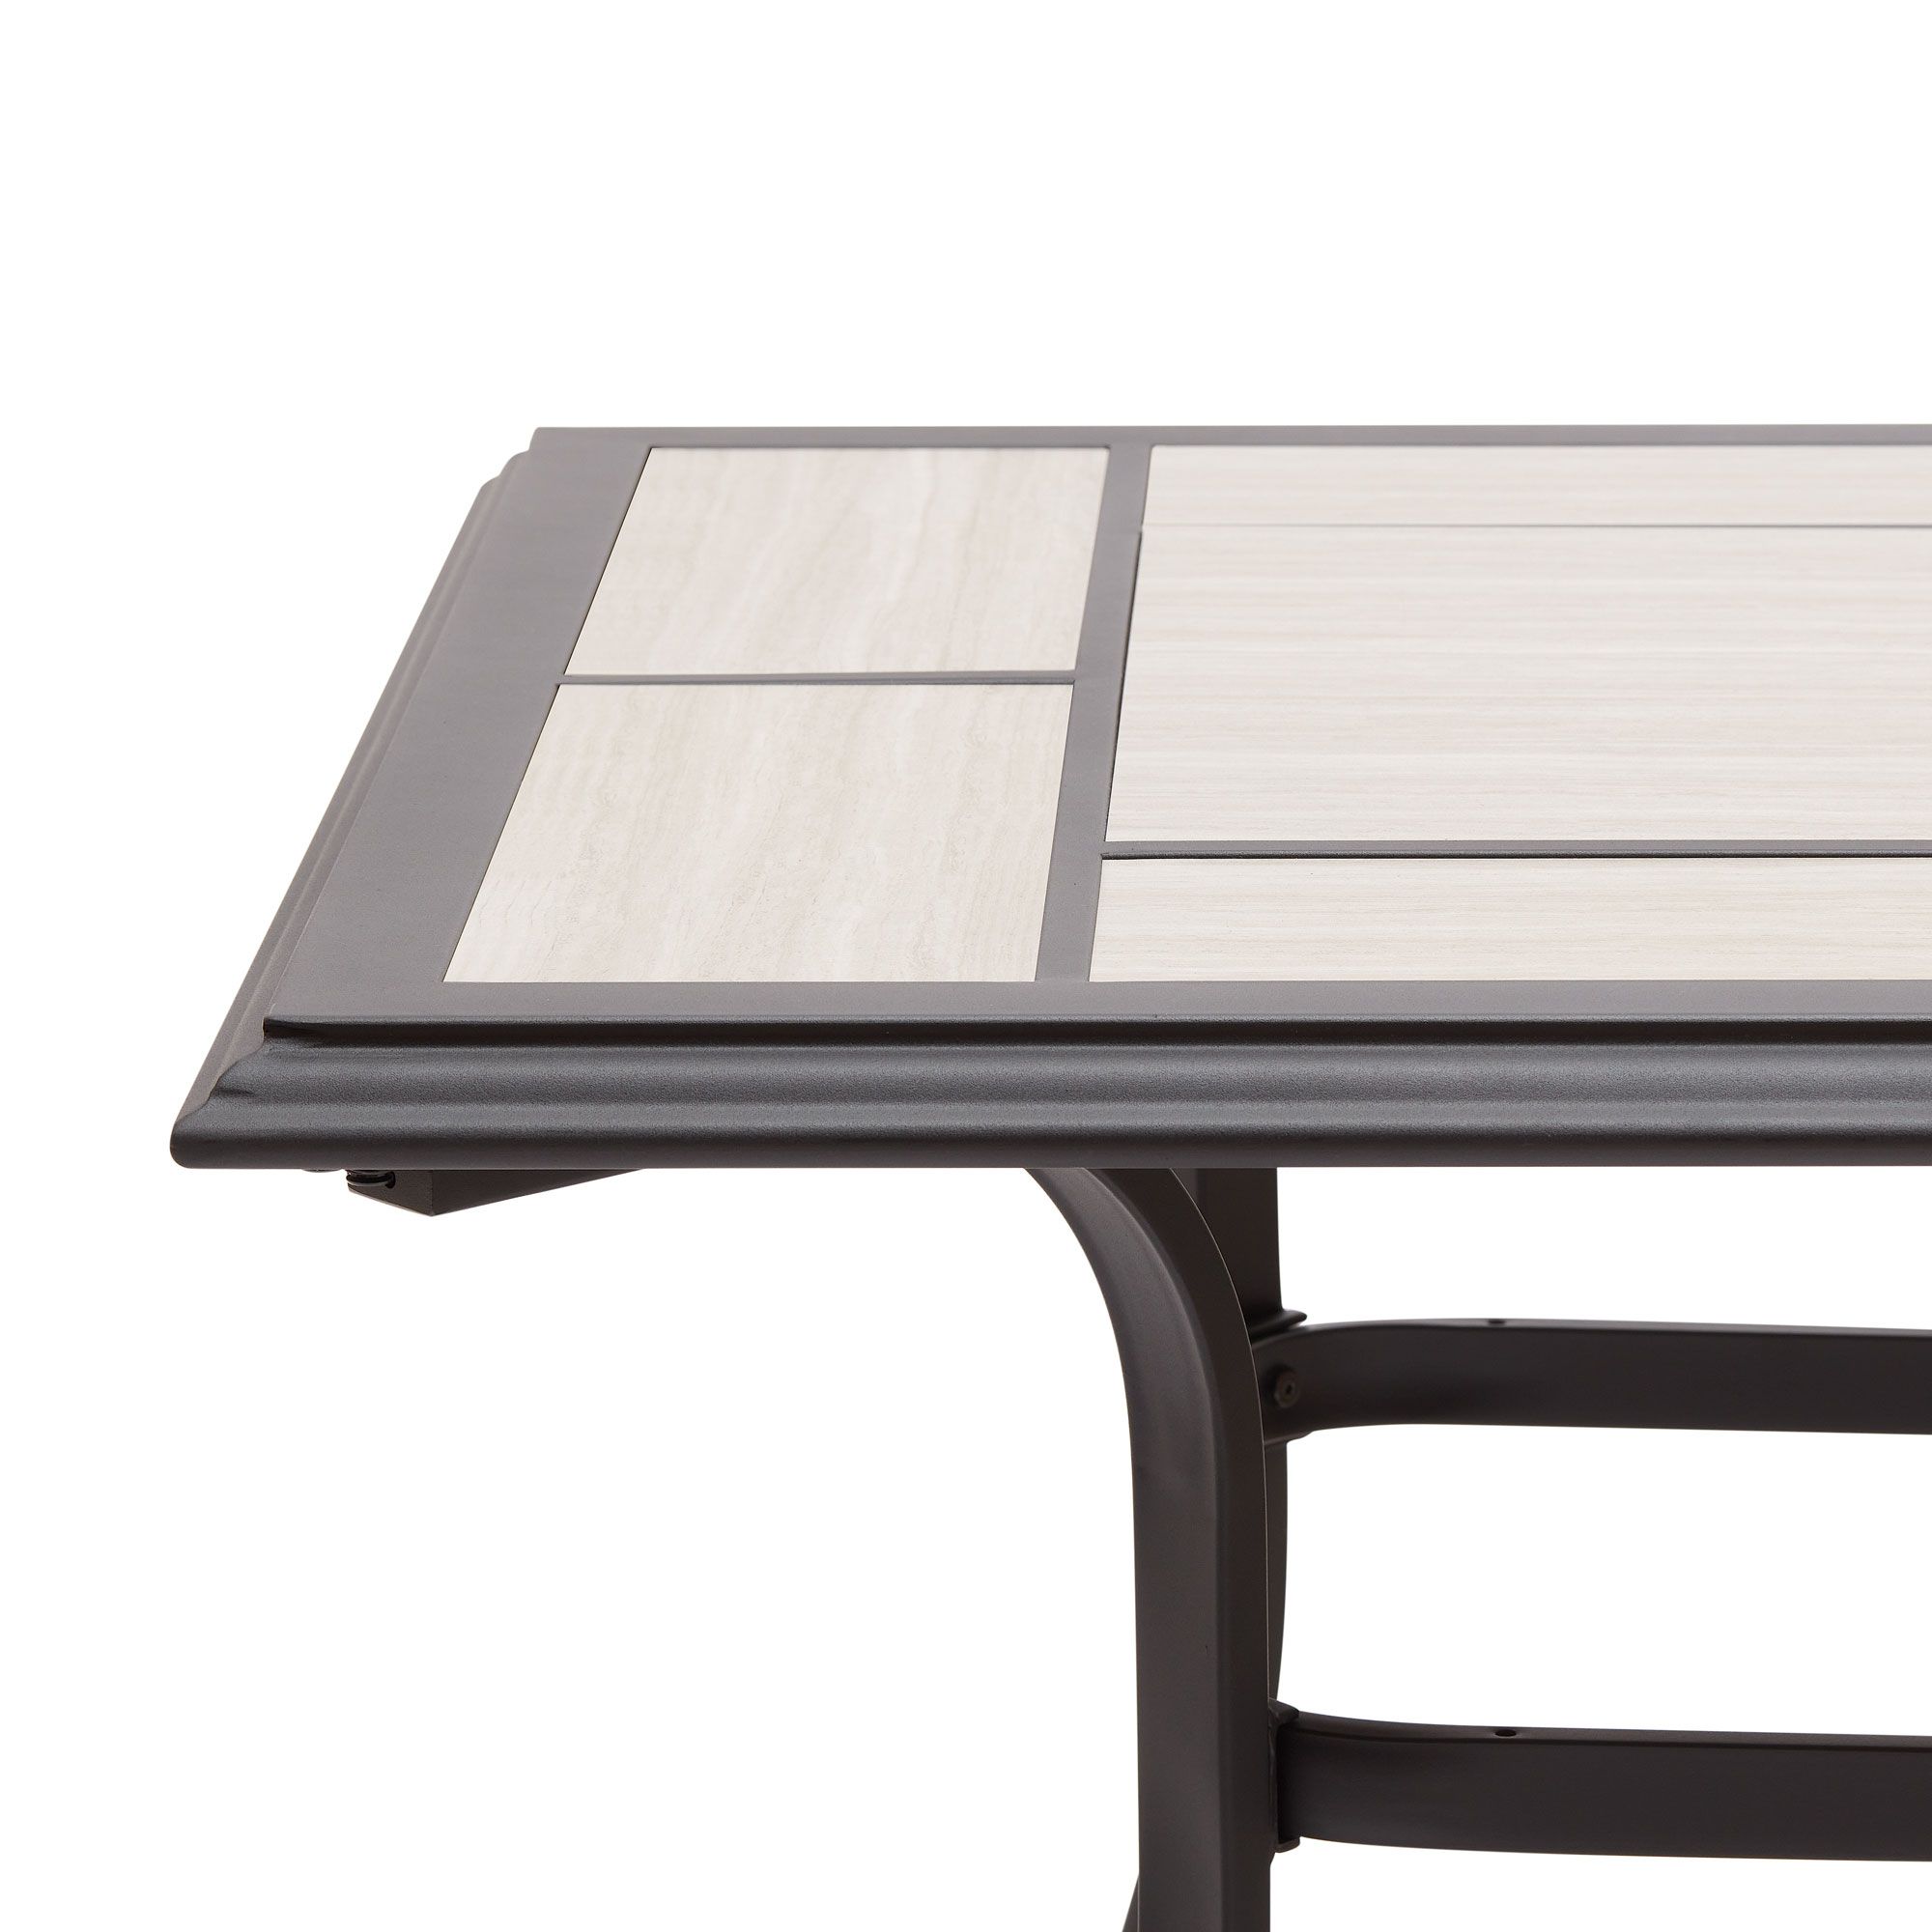 Better Homes & Gardens Newport Outdoor Ceramic Tile Top Rectangular Dining Table with Umbrella Hole, Gray Tabletop, Black Frame Finish, Seats 6 - image 2 of 8